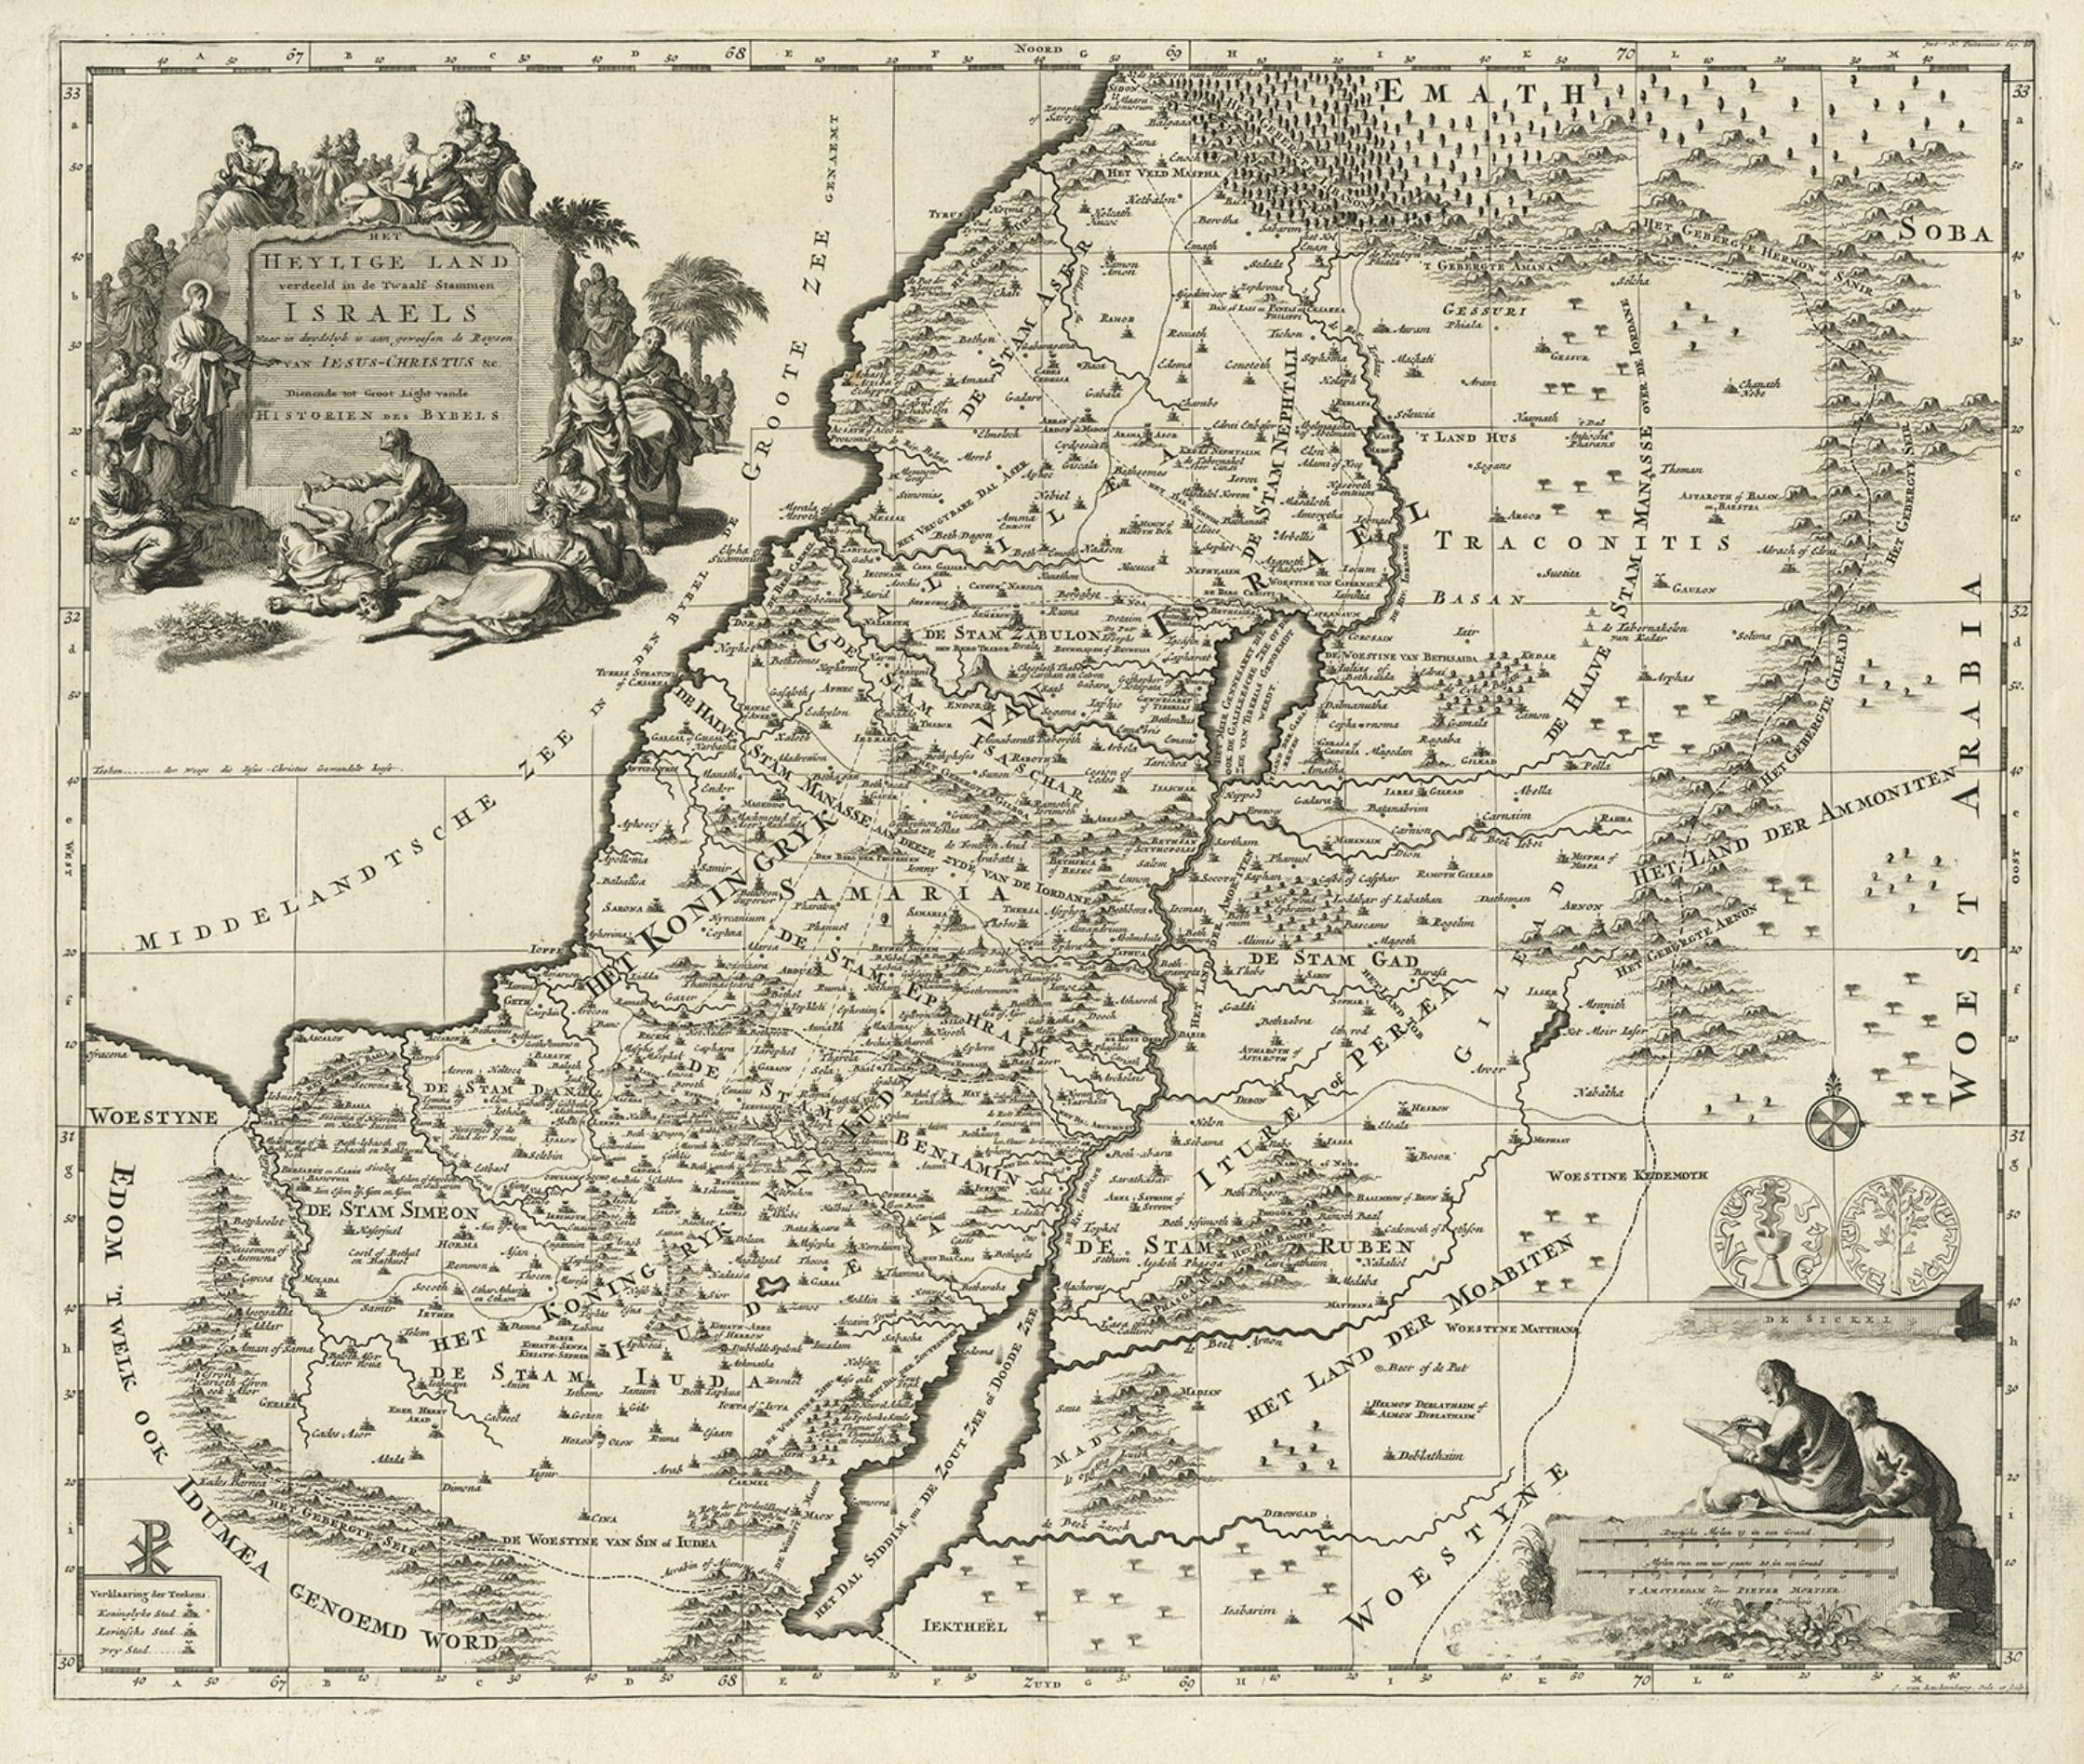 Antique map titled 'Heylige Land verdeeld in de Twaalf Stammen Israels (..).' 

Highly detailed map of the Holy Land divided into 12 tribes of Israel. With beautiful large title cartouche, vignette with scale and compass rose. Published in the